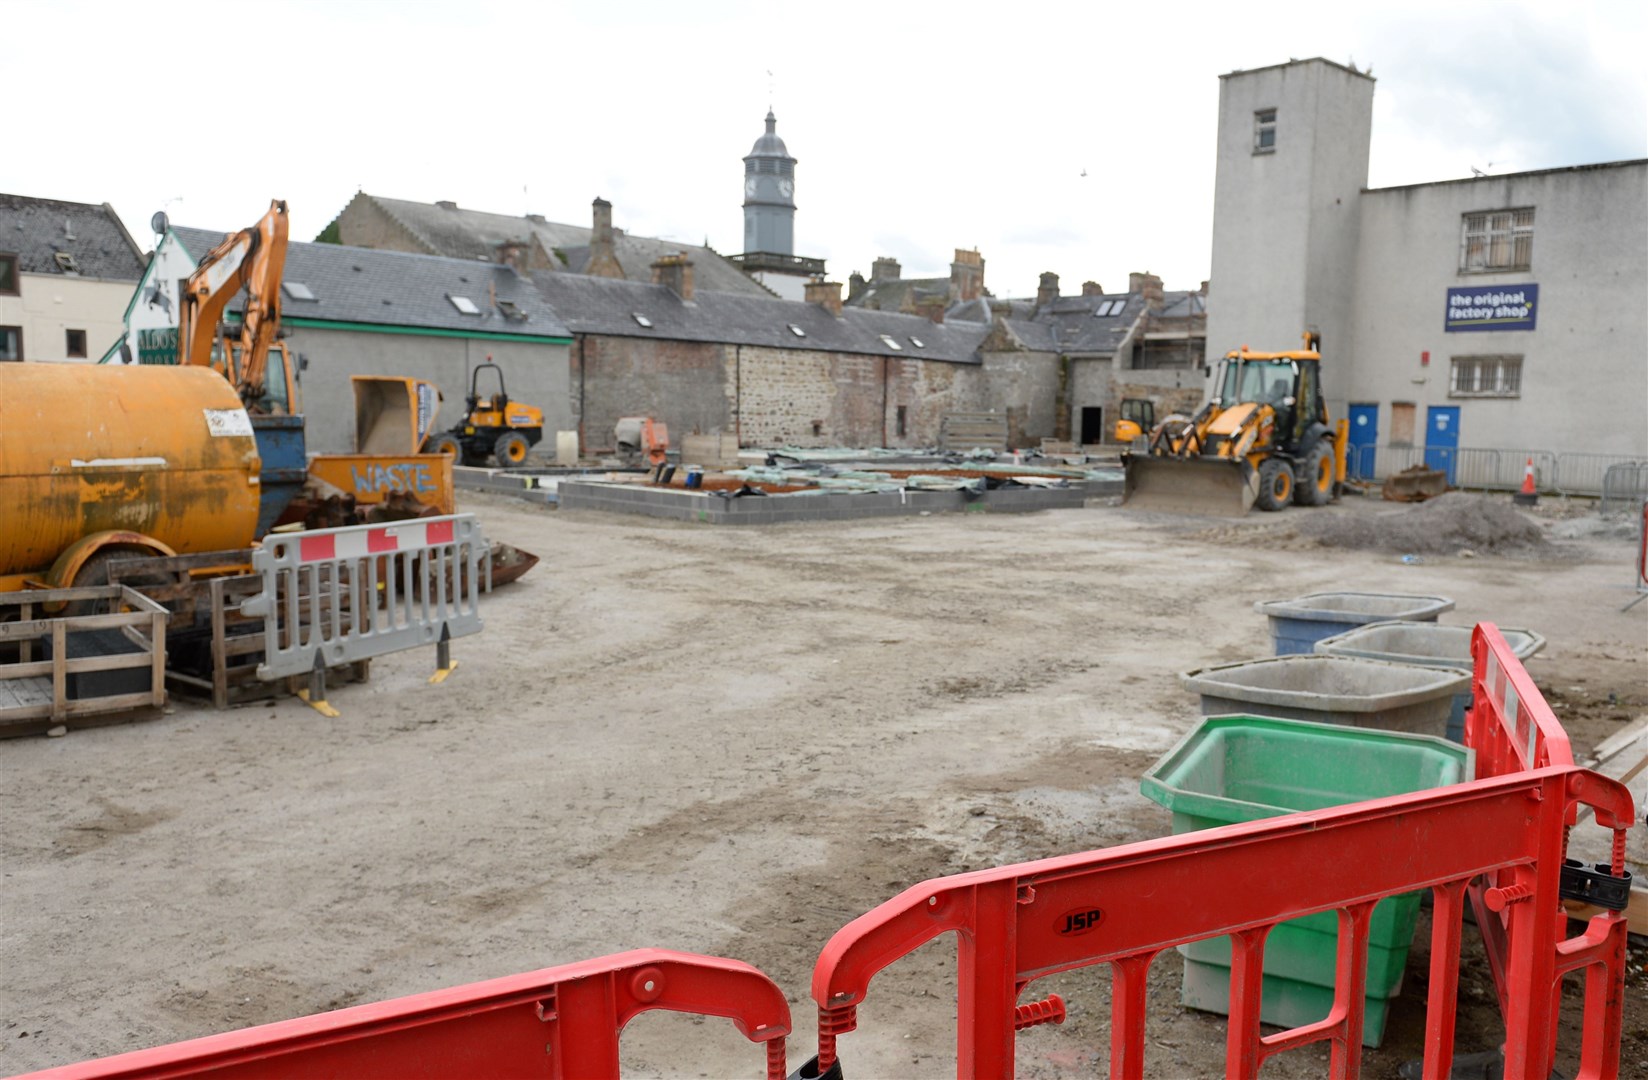 The town centre project will provide flats to be managed by Highland Council plus two private retail units.